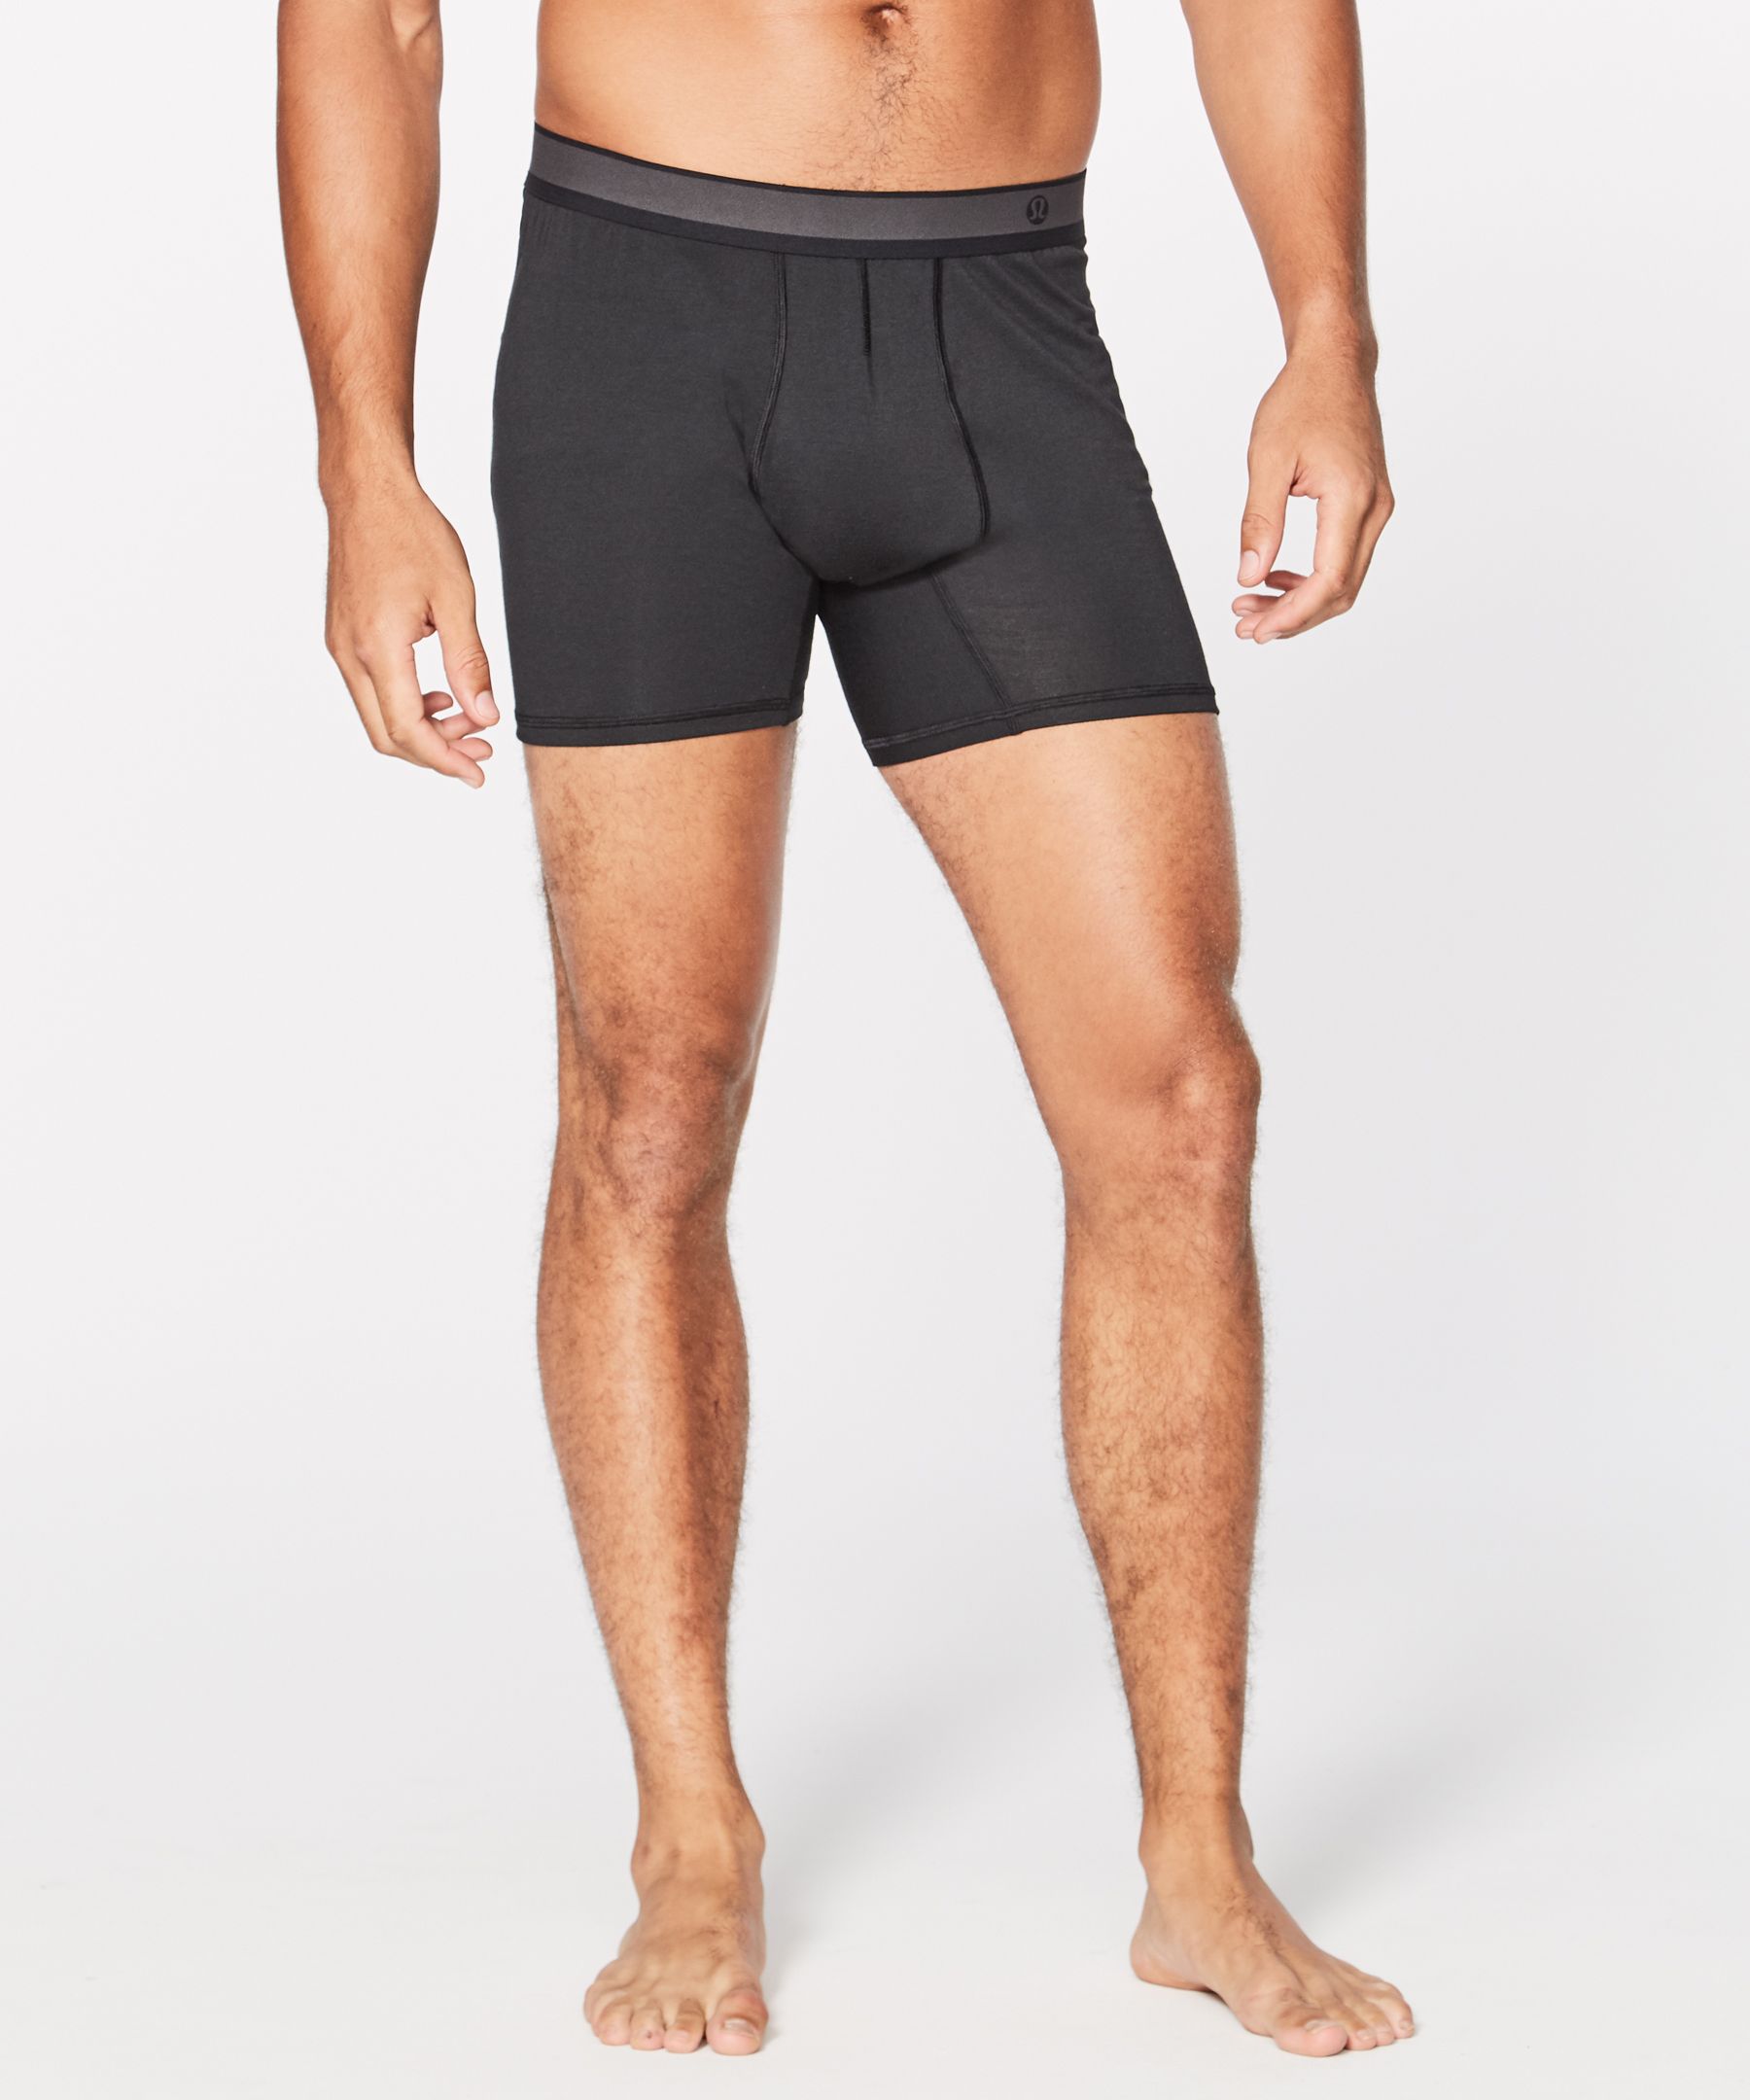 lululemon boxers review